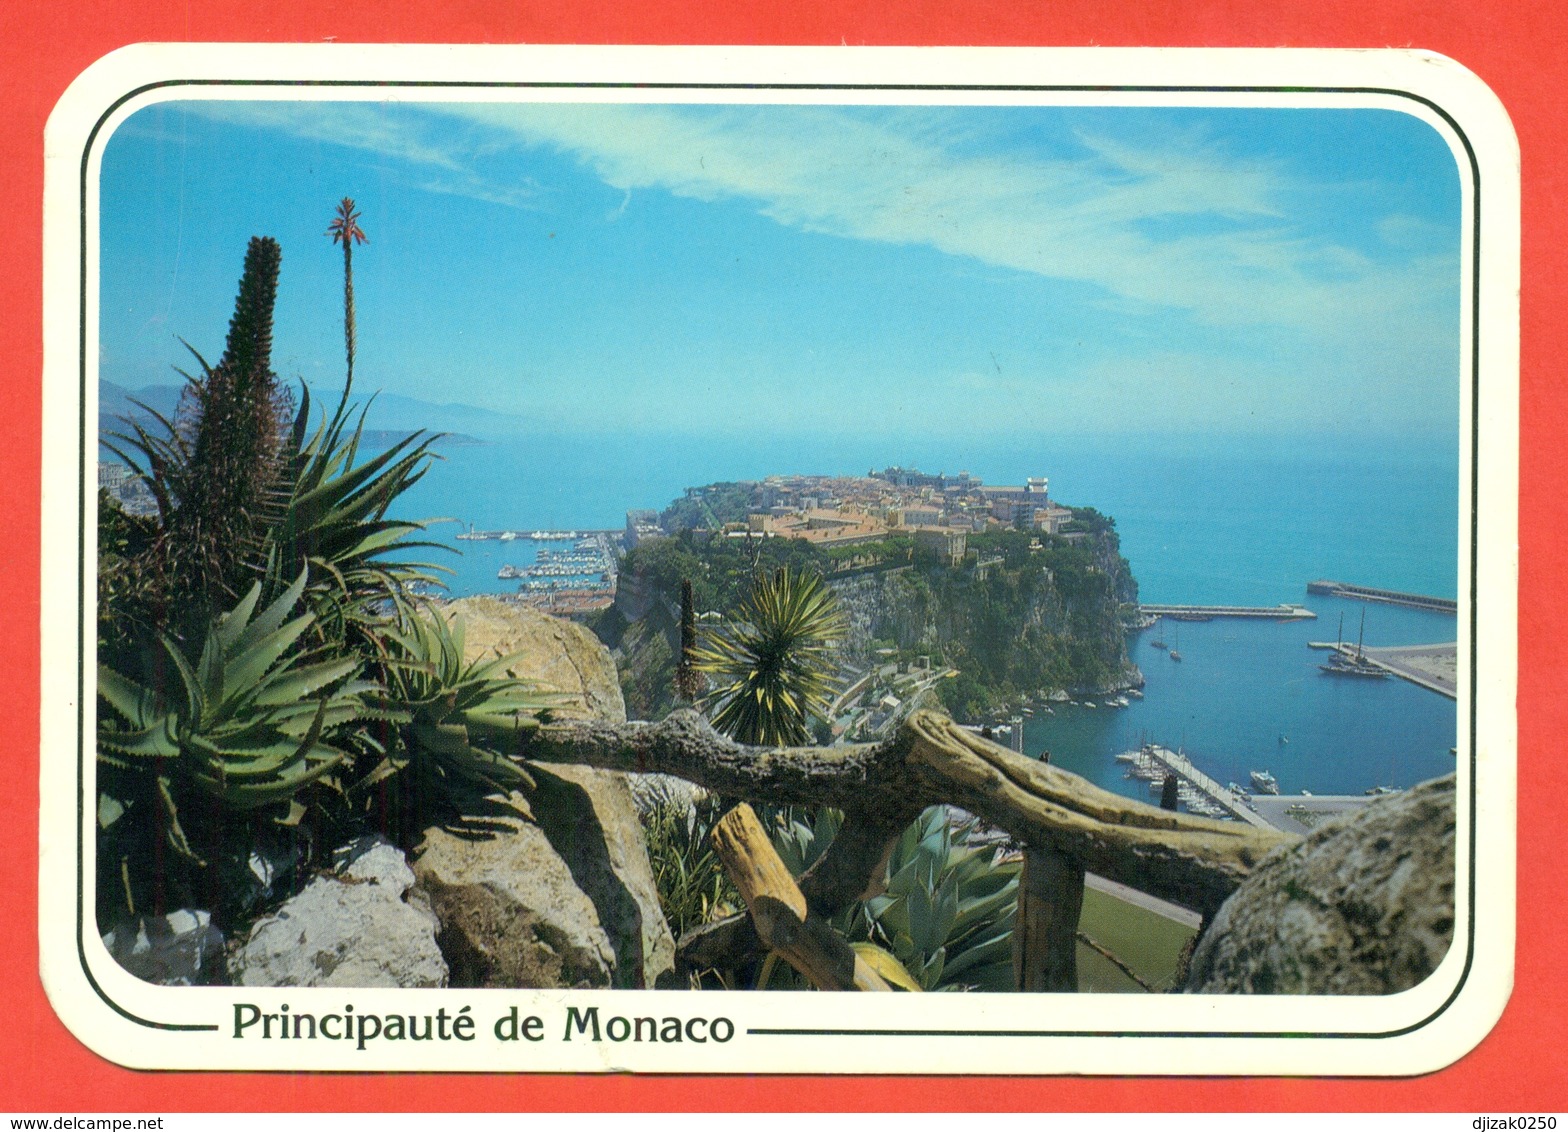 Monaco 1985. Cactusses. Postcard Passed Mail With A Special Stamp. - Cactusses